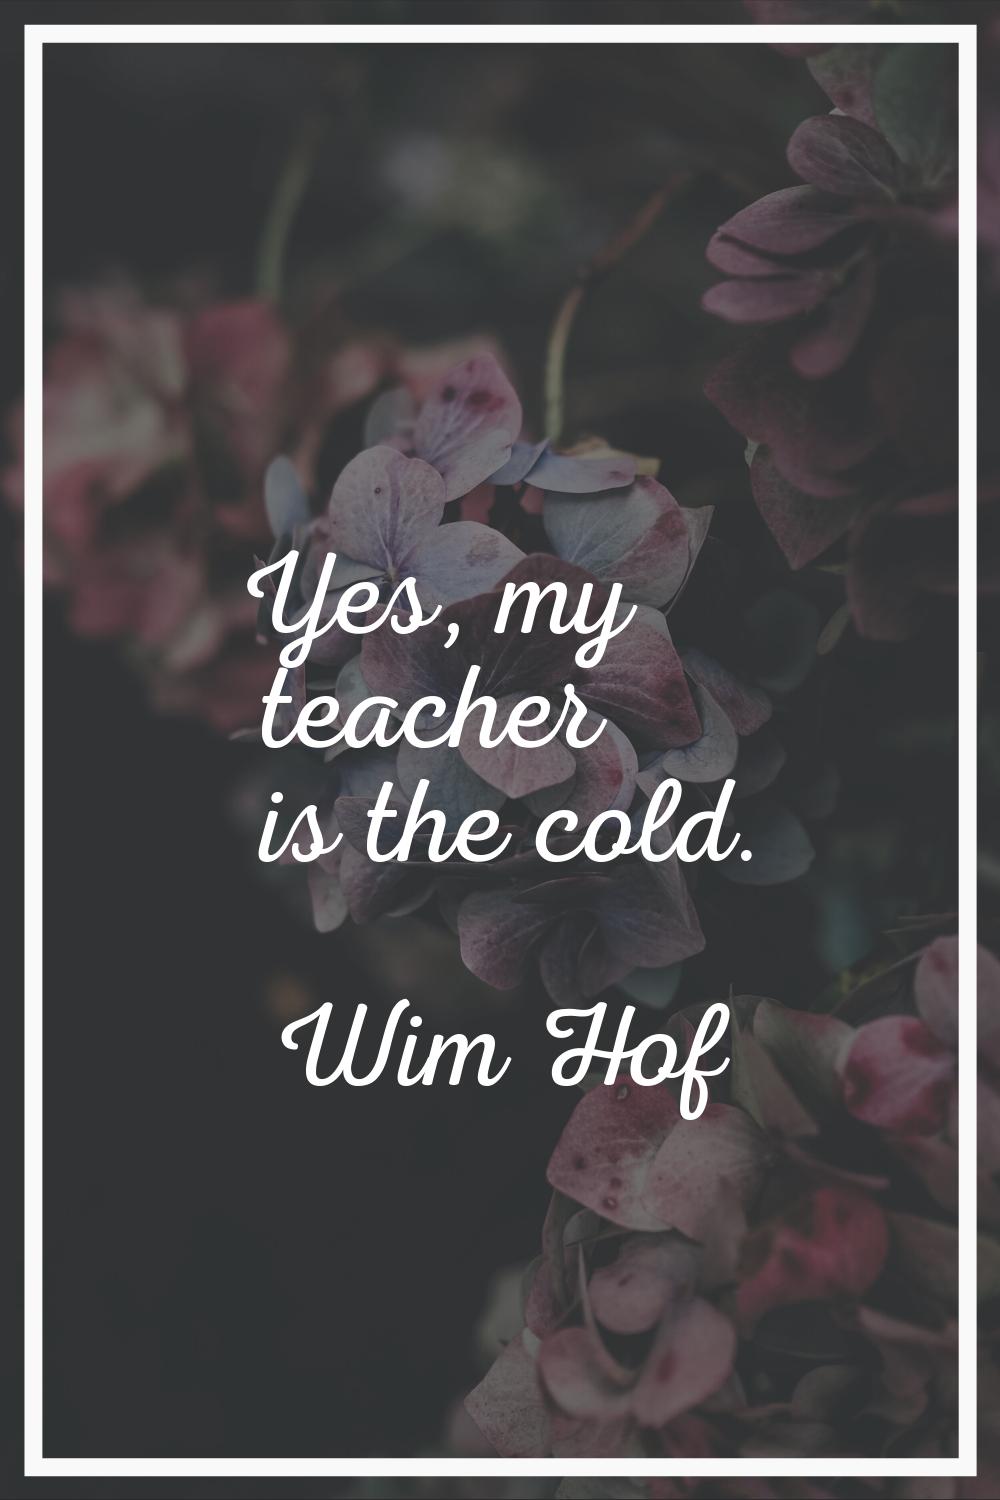 Yes, my teacher is the cold.